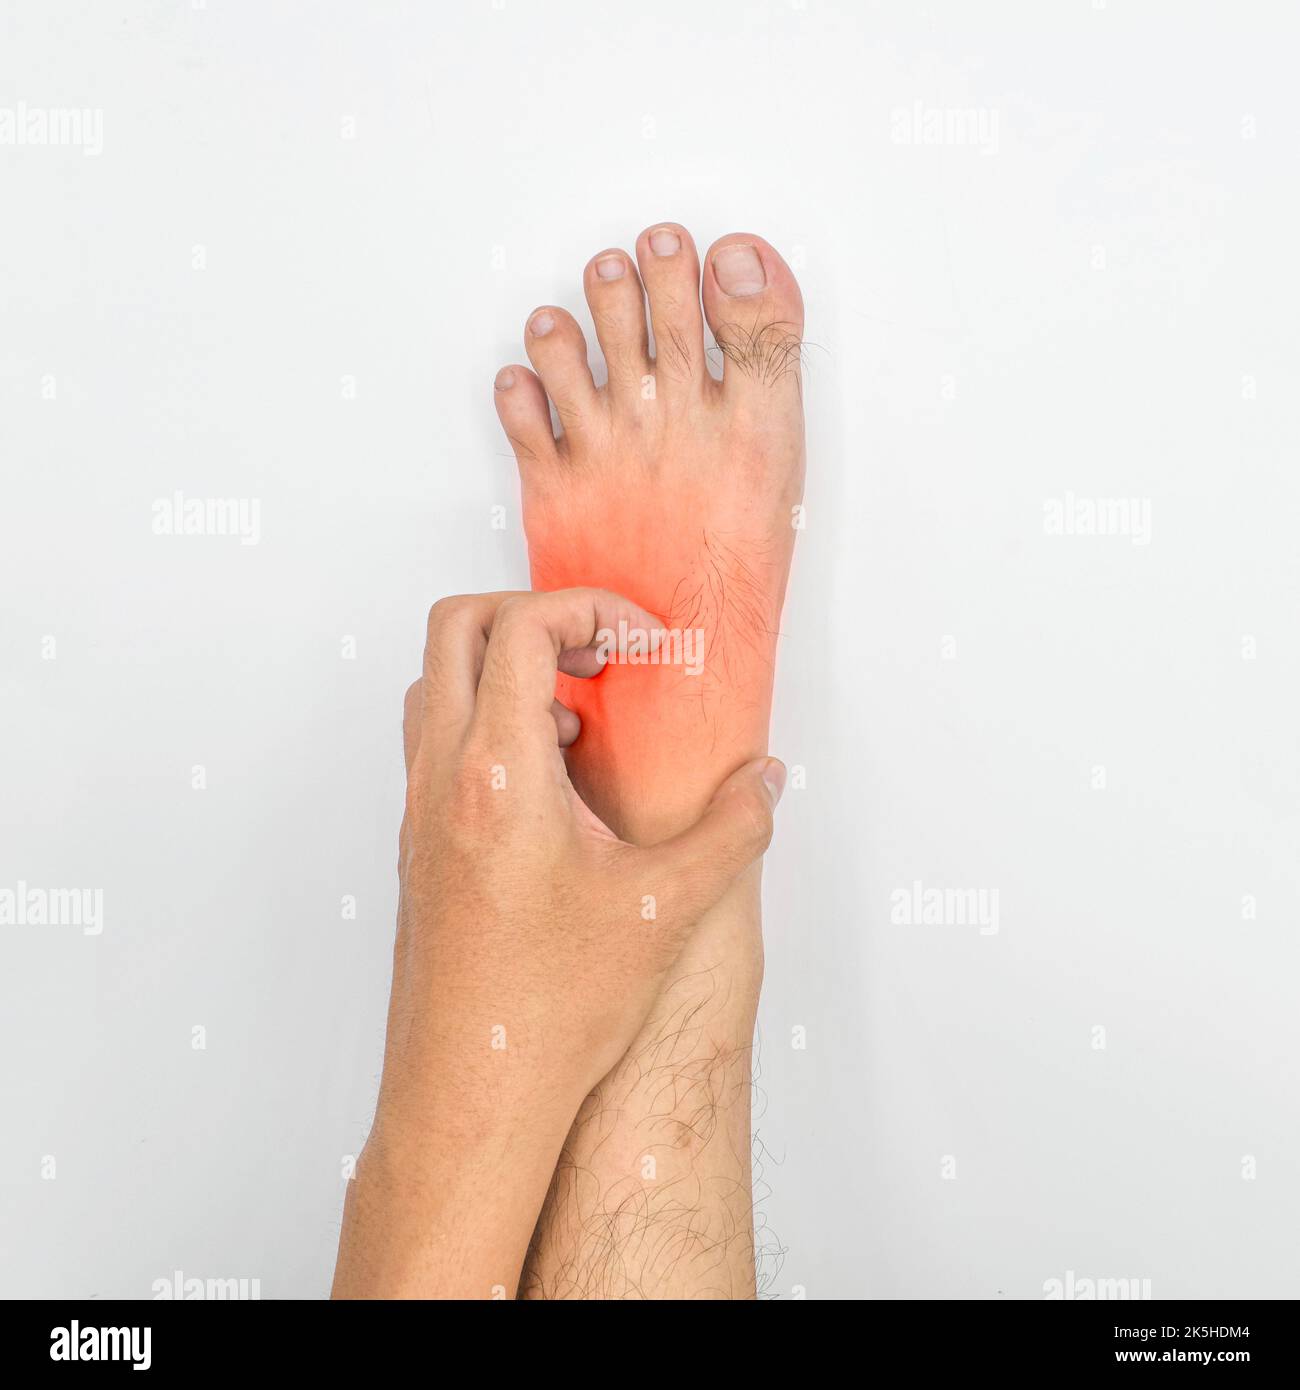 Asian young man scratching his foot. Concept of itchy skin diseases such as scabies, fungal infection, eczema, psoriasis, allergy, etc. Stock Photo